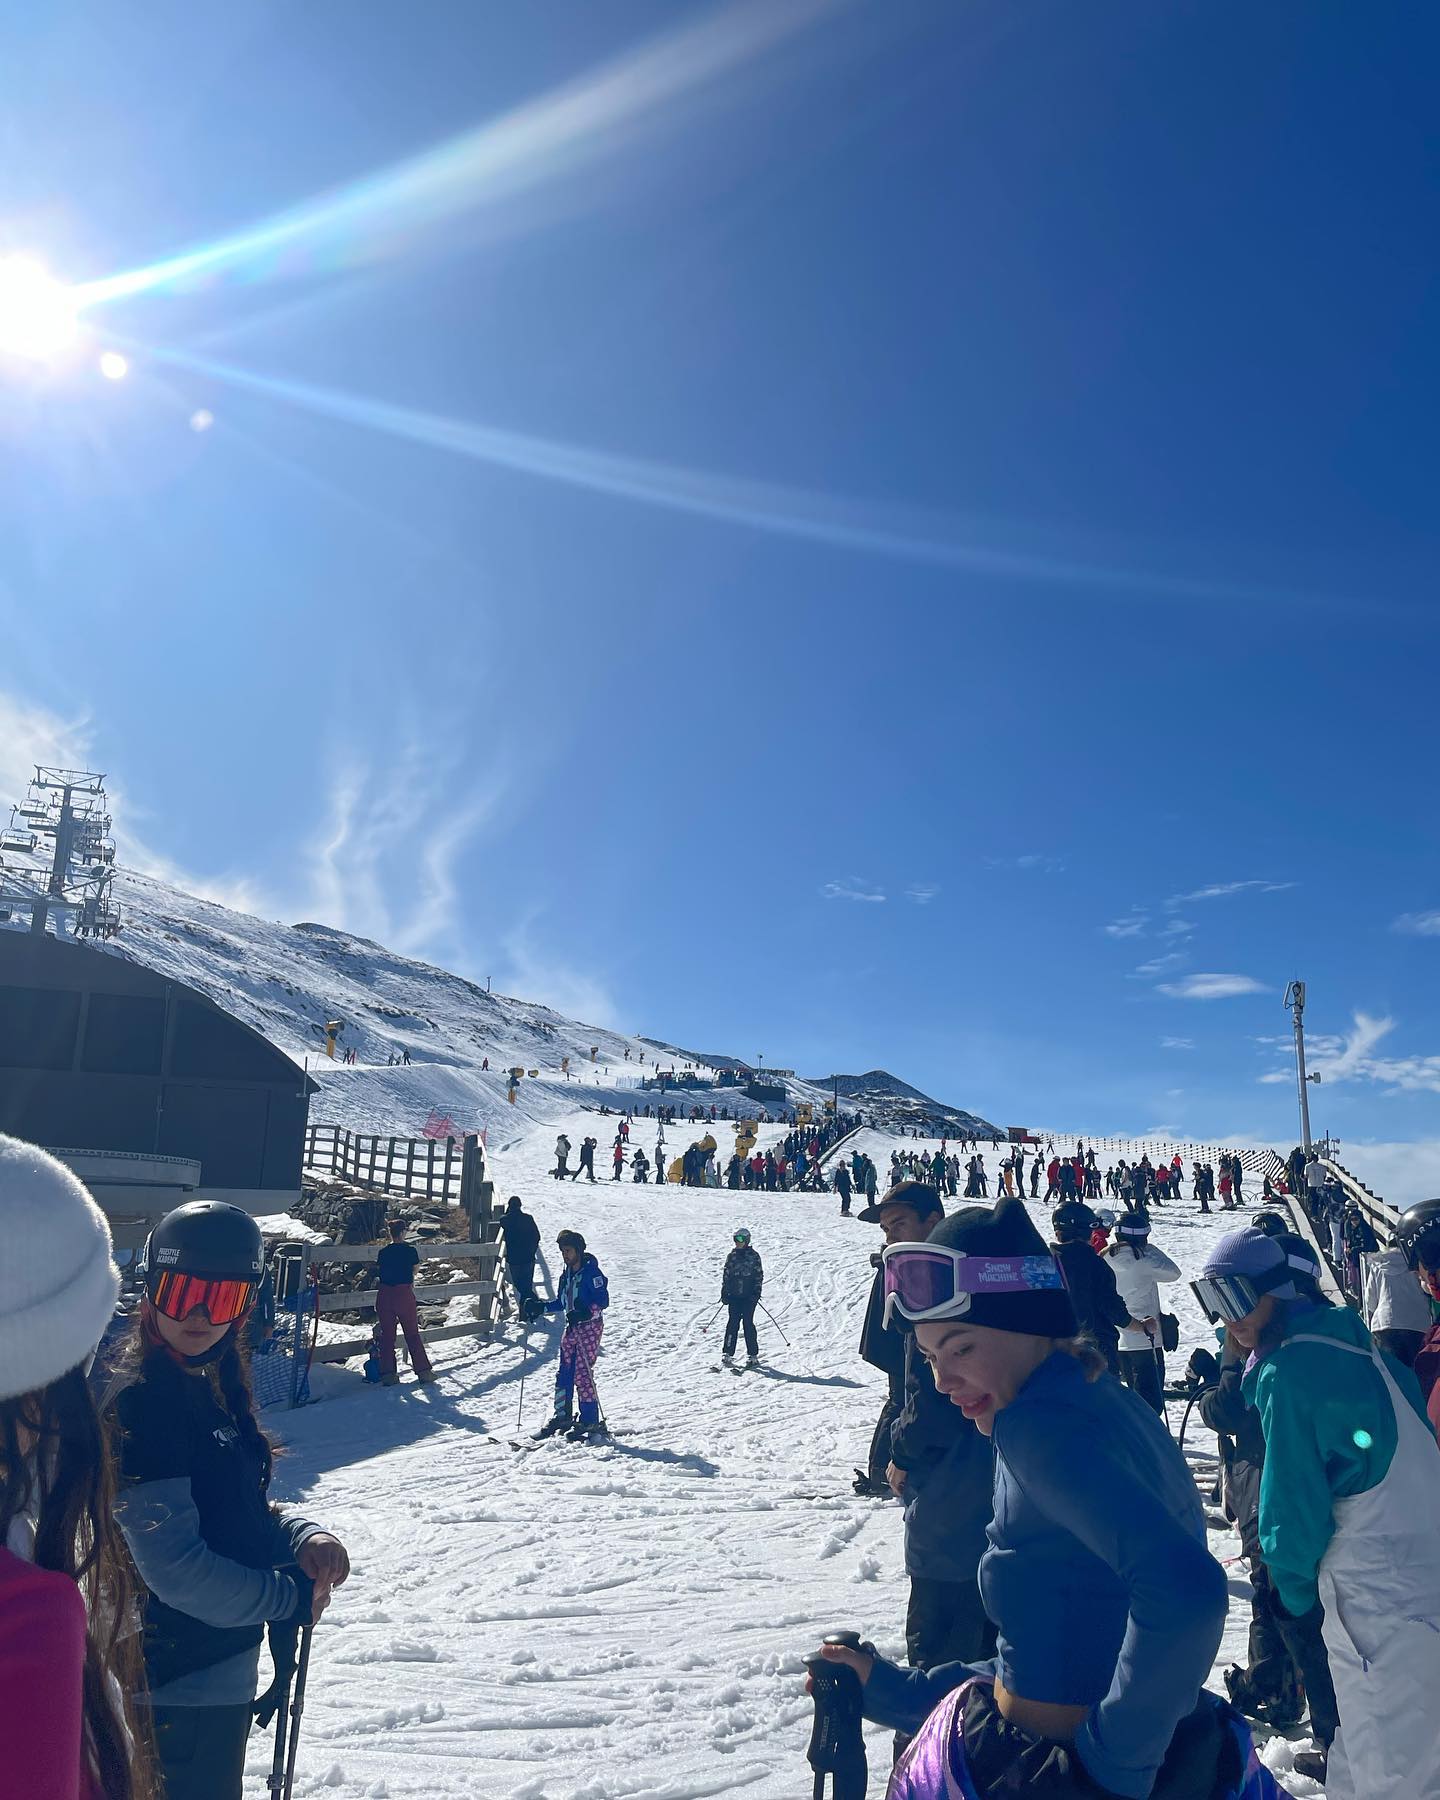 Chasing winter vibes in NZ at Snow Machine 2023: we skied in surprisingly warm weather, and check the last slide for our adorable snow ducky stealing the show! 

Ft. Special guest ~ Arctic Velocity, the Blizzard Bolt!

Can not wait to be back in the snow next month ❄️🎿 

Going to be posting more NZ/SM content! Stay tuned! Downloading my camera footage!

#throwback #SnowAdventures #NZTrip #snowmachine #travelvlogger #xephersworld #influencer #skiing #snowholiday #queenstown